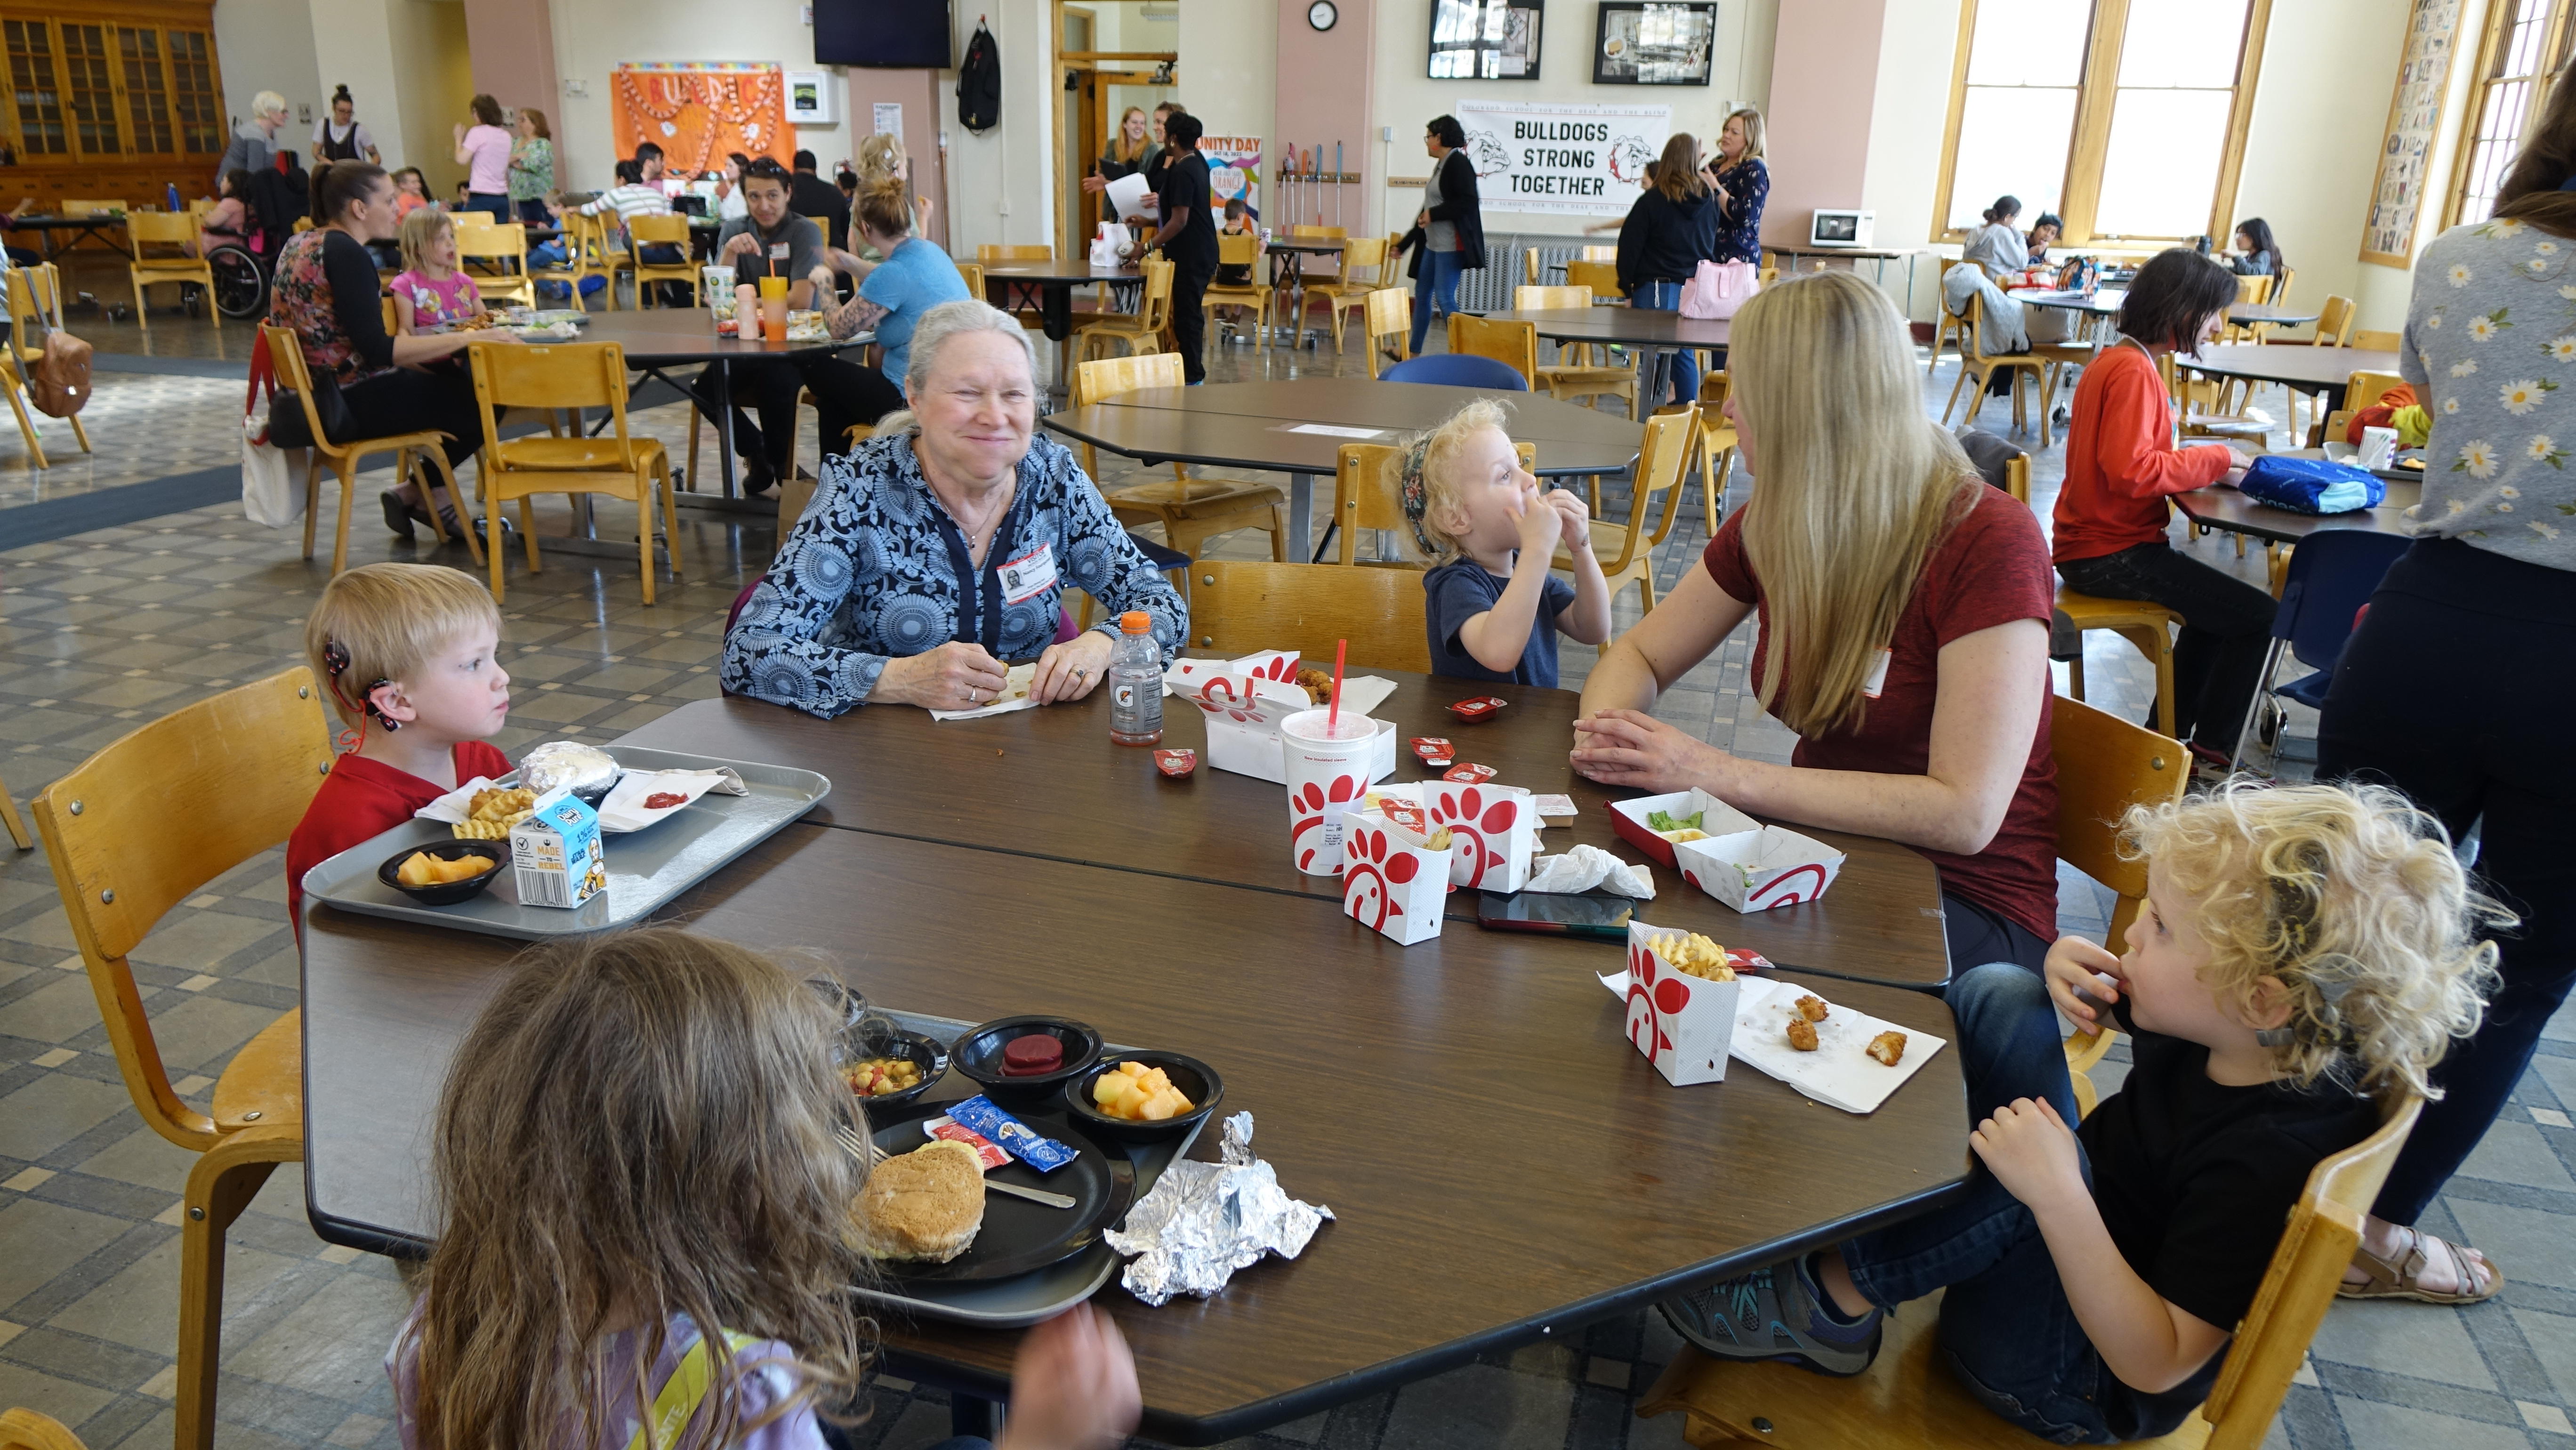 Mom and grandma eat lunch with twin boys and two other children